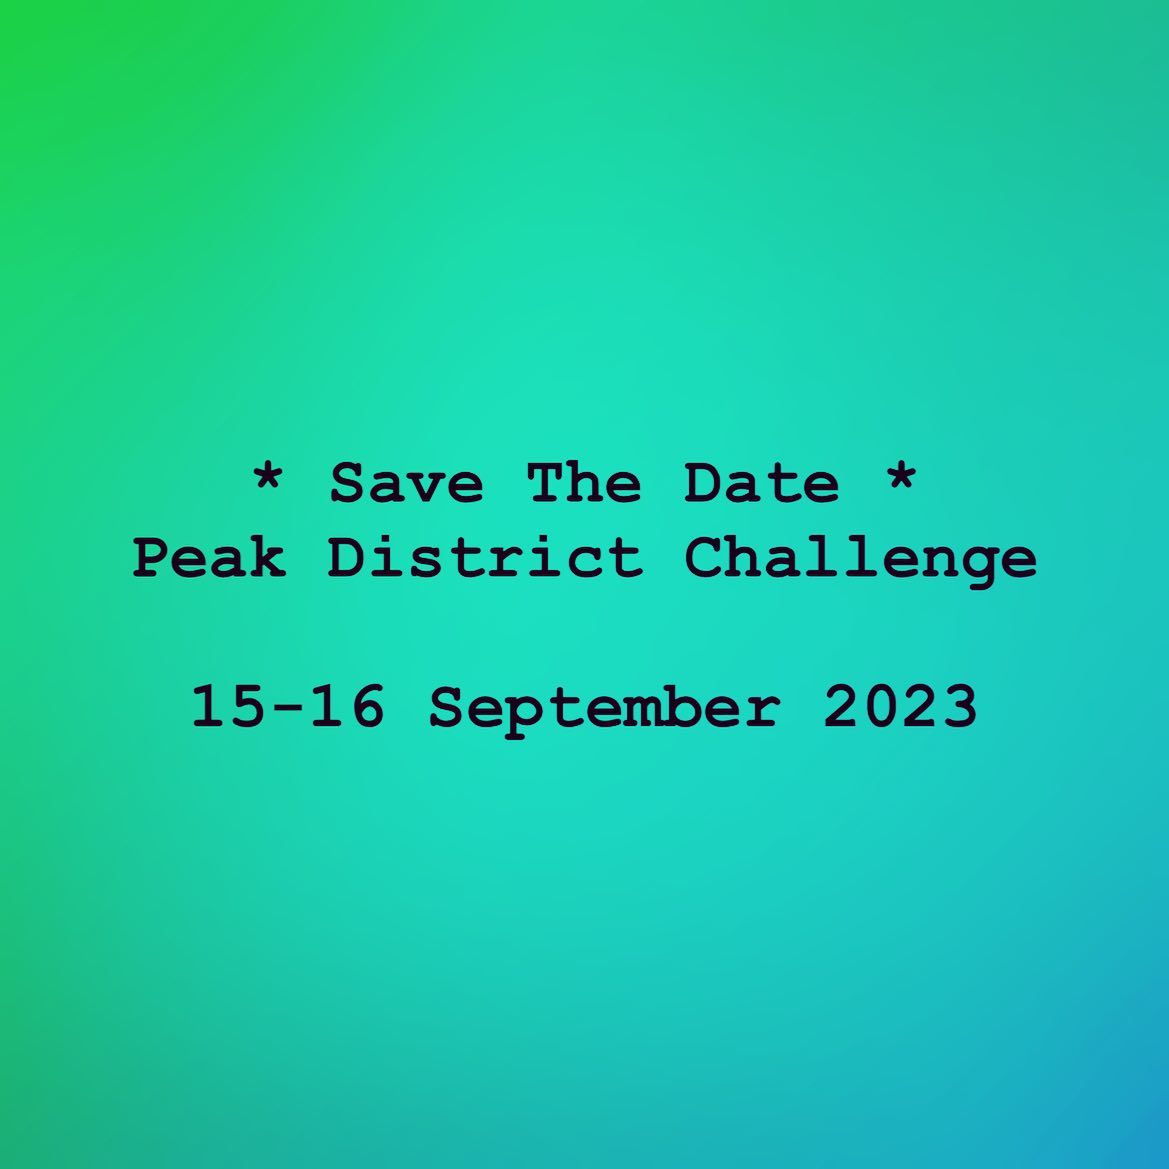 Peak District Challenge 2023 is taking place on 15-16 September! Sign up to our mailing list to b...